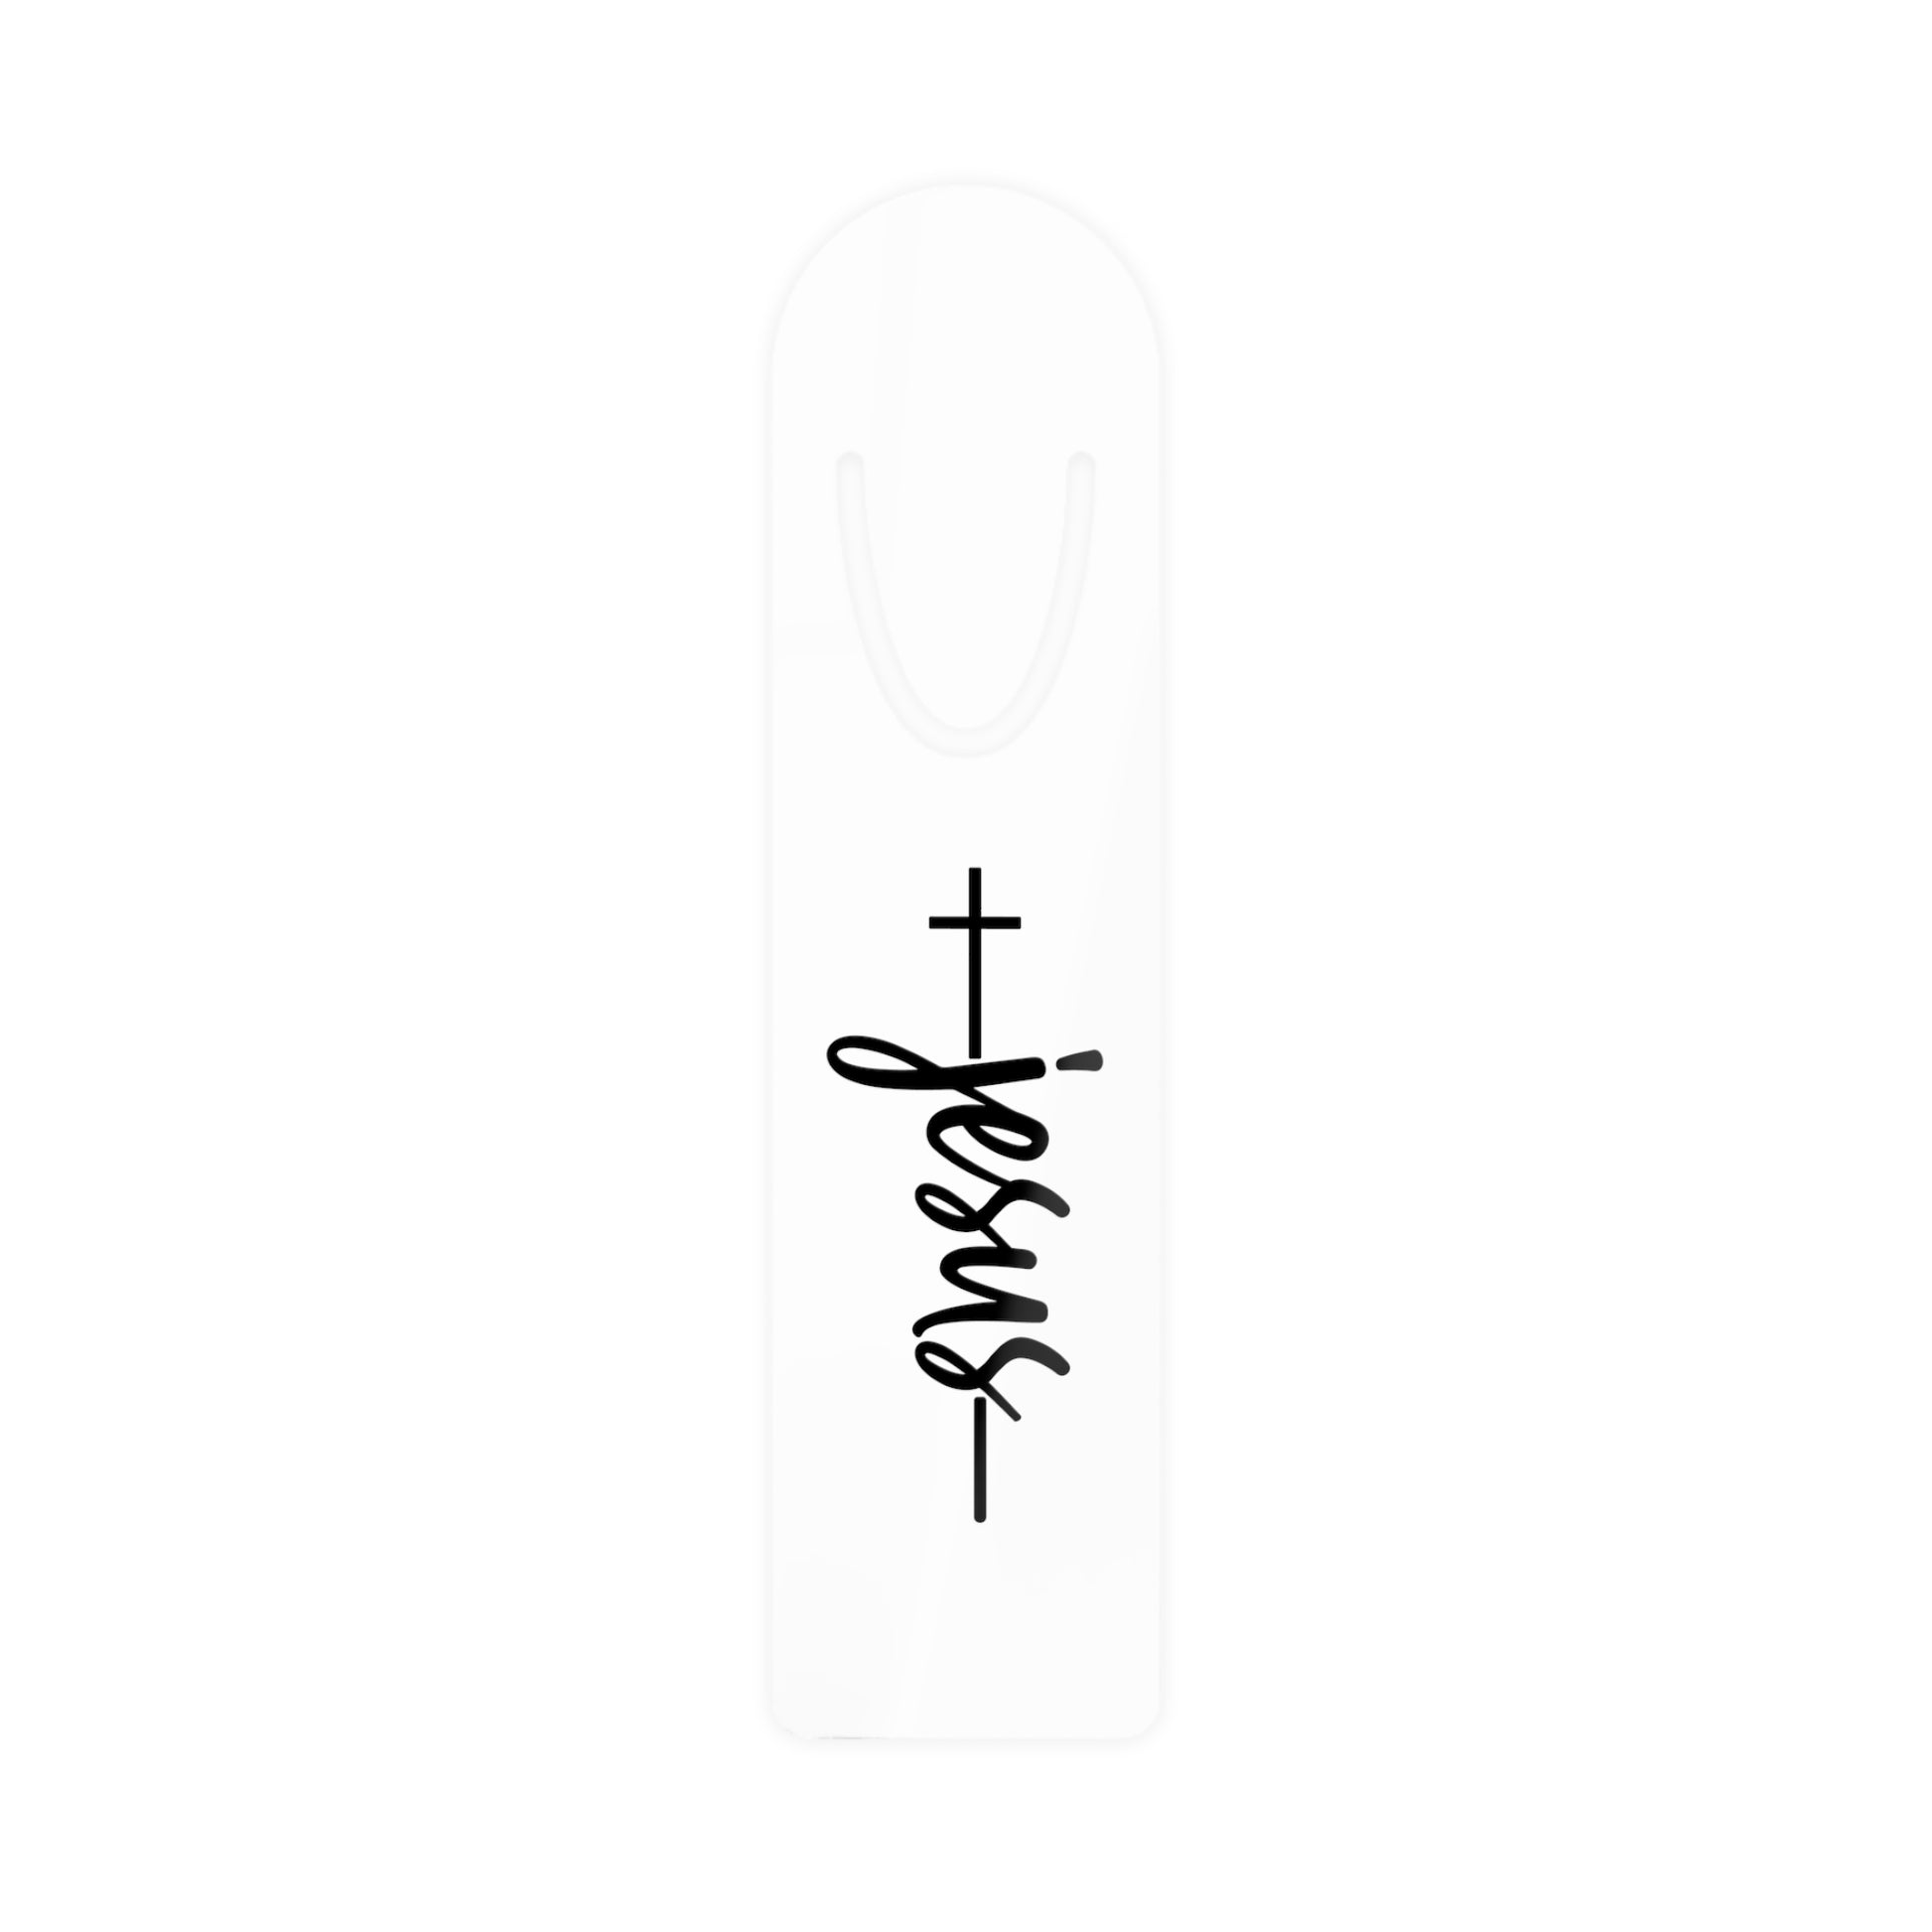 Jesus bookmark that allows you to hold your place while reading scripture, a devotional, or your other literary favorite. Shop SmithRidge.farm.